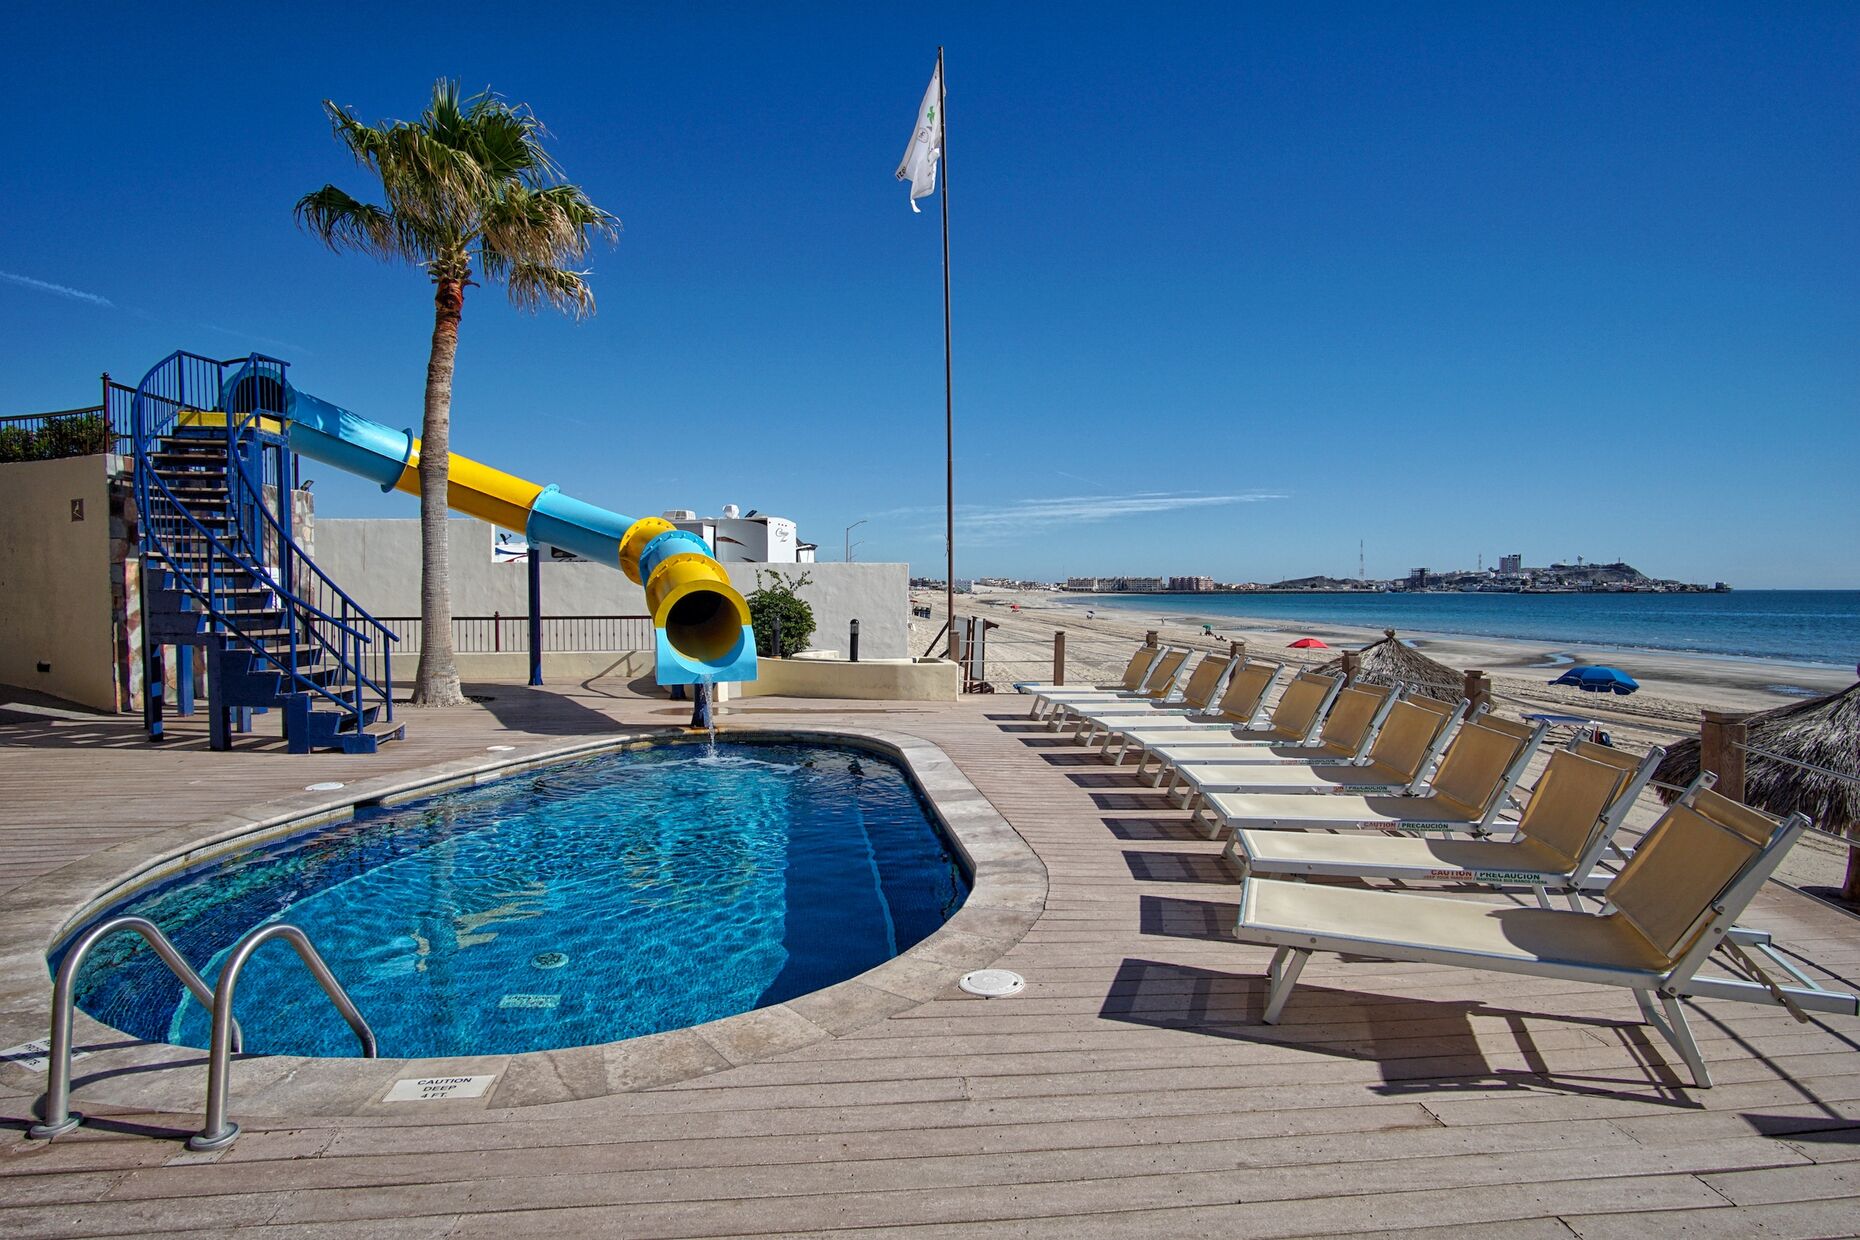 An additional kids pool, with water slide.